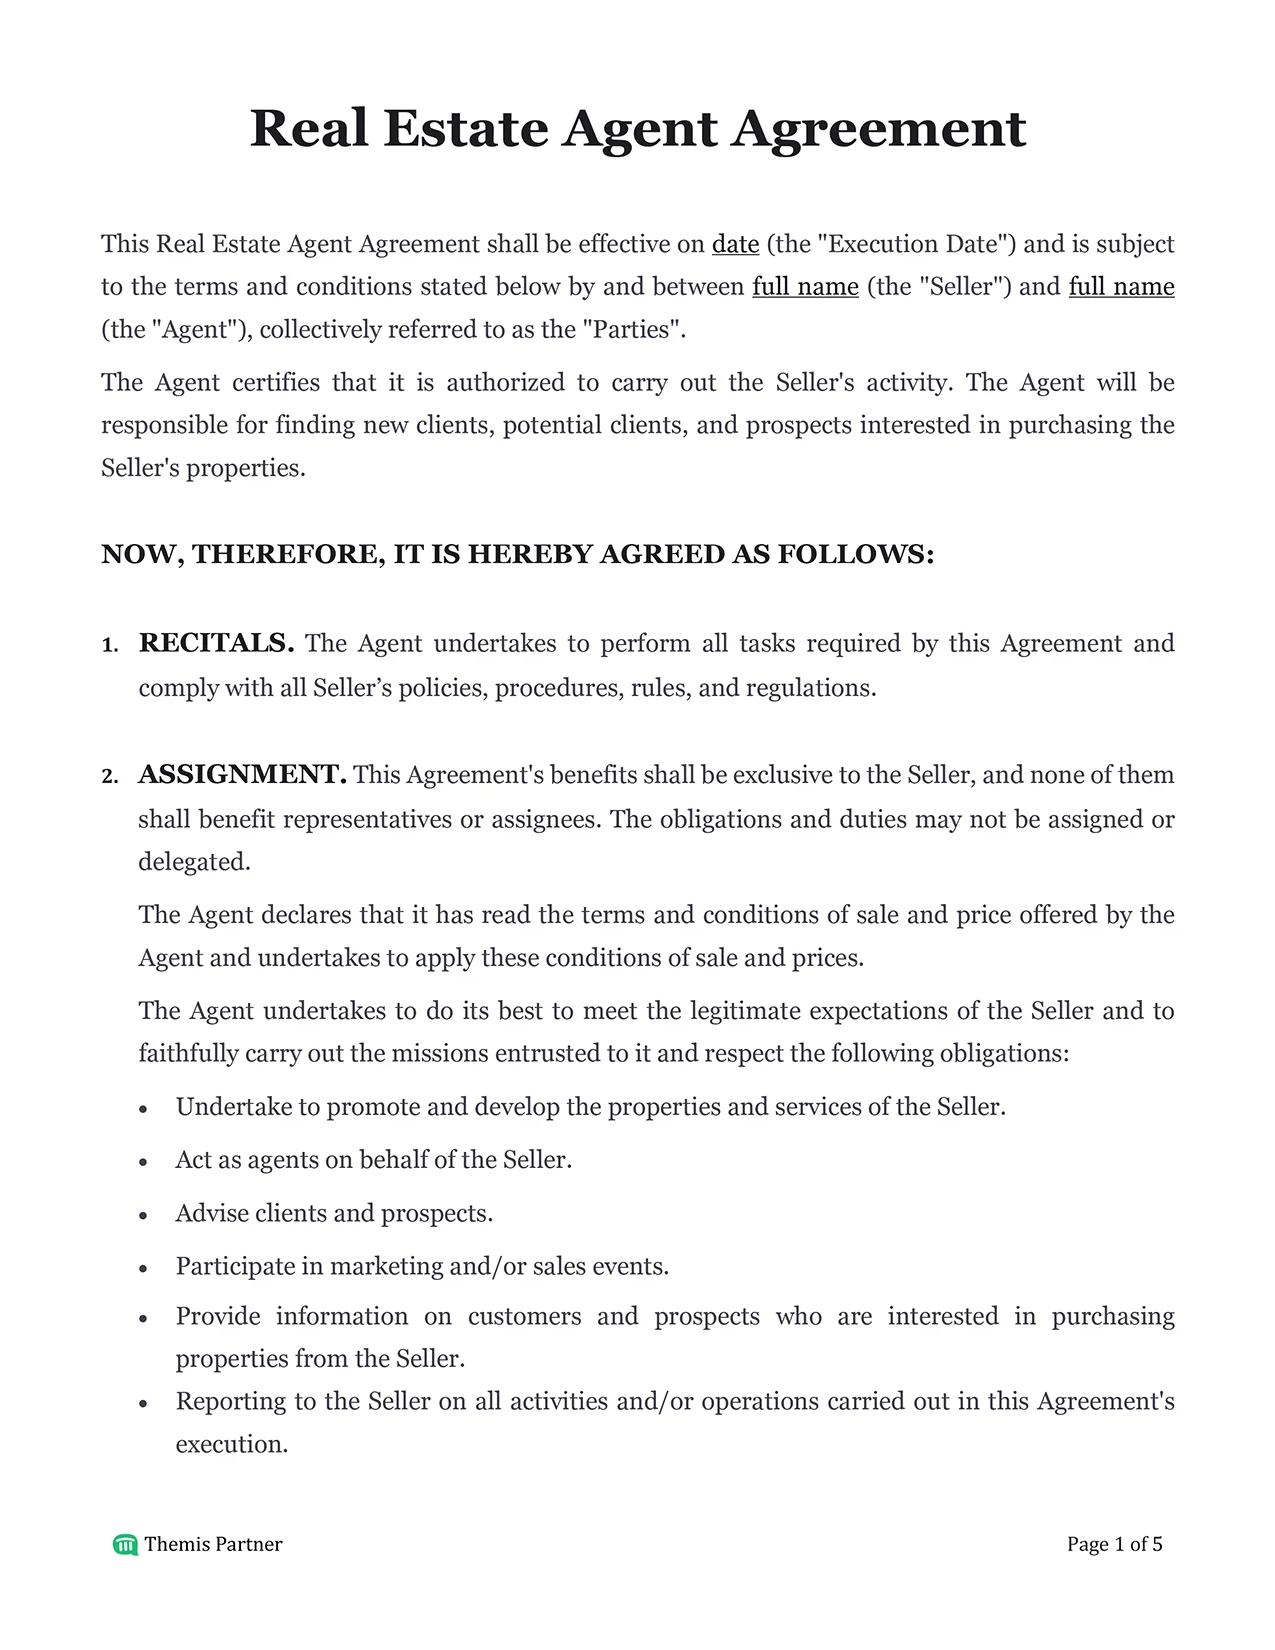 Real estate agent agreement Philippines 1